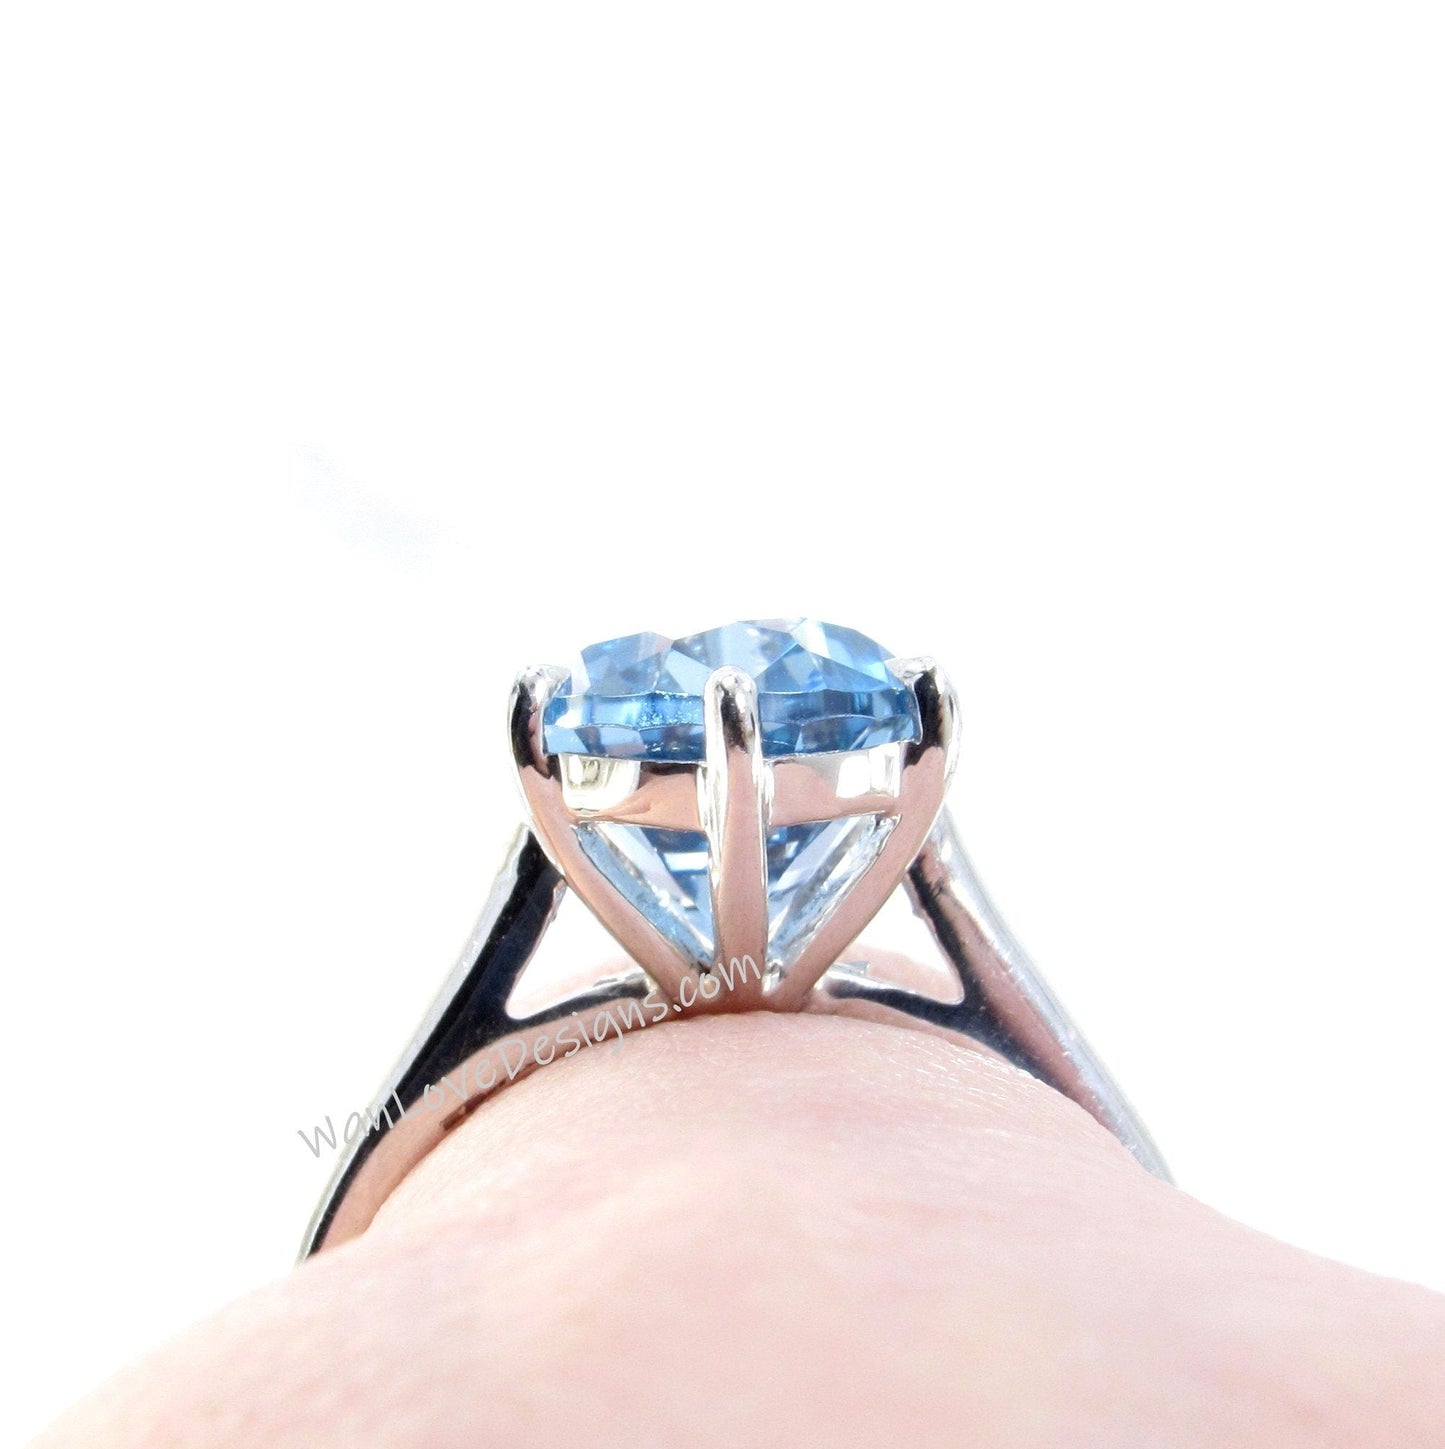 Aquamarine Blue Spinel 6 Prong Pear Solitaire Engagement Ring Cathedral 4.5ct 12x9mm Wedding Anniversary Ready to ship Wan Love Designs